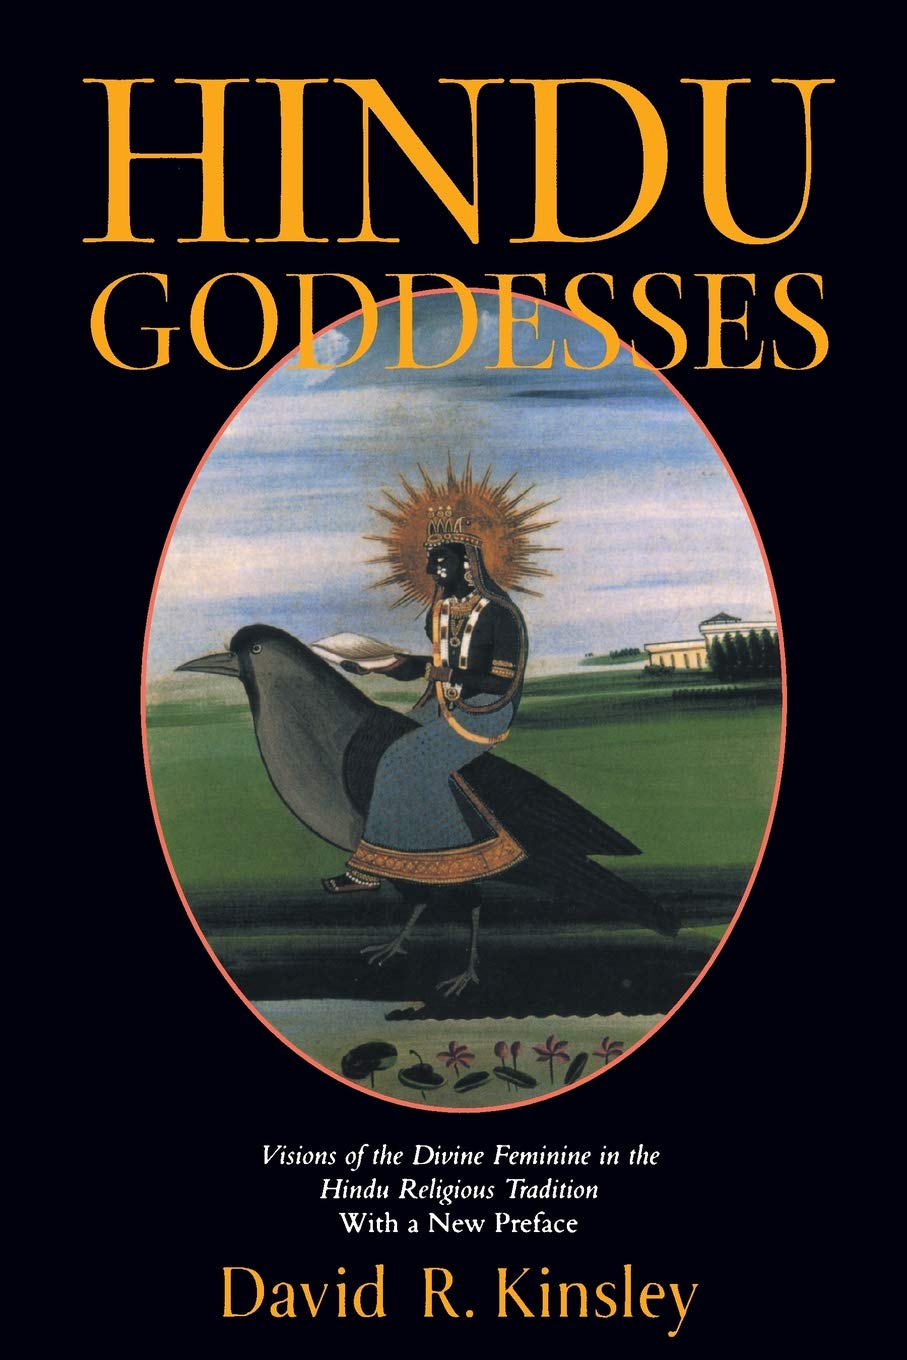 Book Cover Hindu Goddesses: Visions of the Divine Feminine in the Hindu Religious Tradition (Volume 12) (Hermeneutics: Studies in the History of Religions)